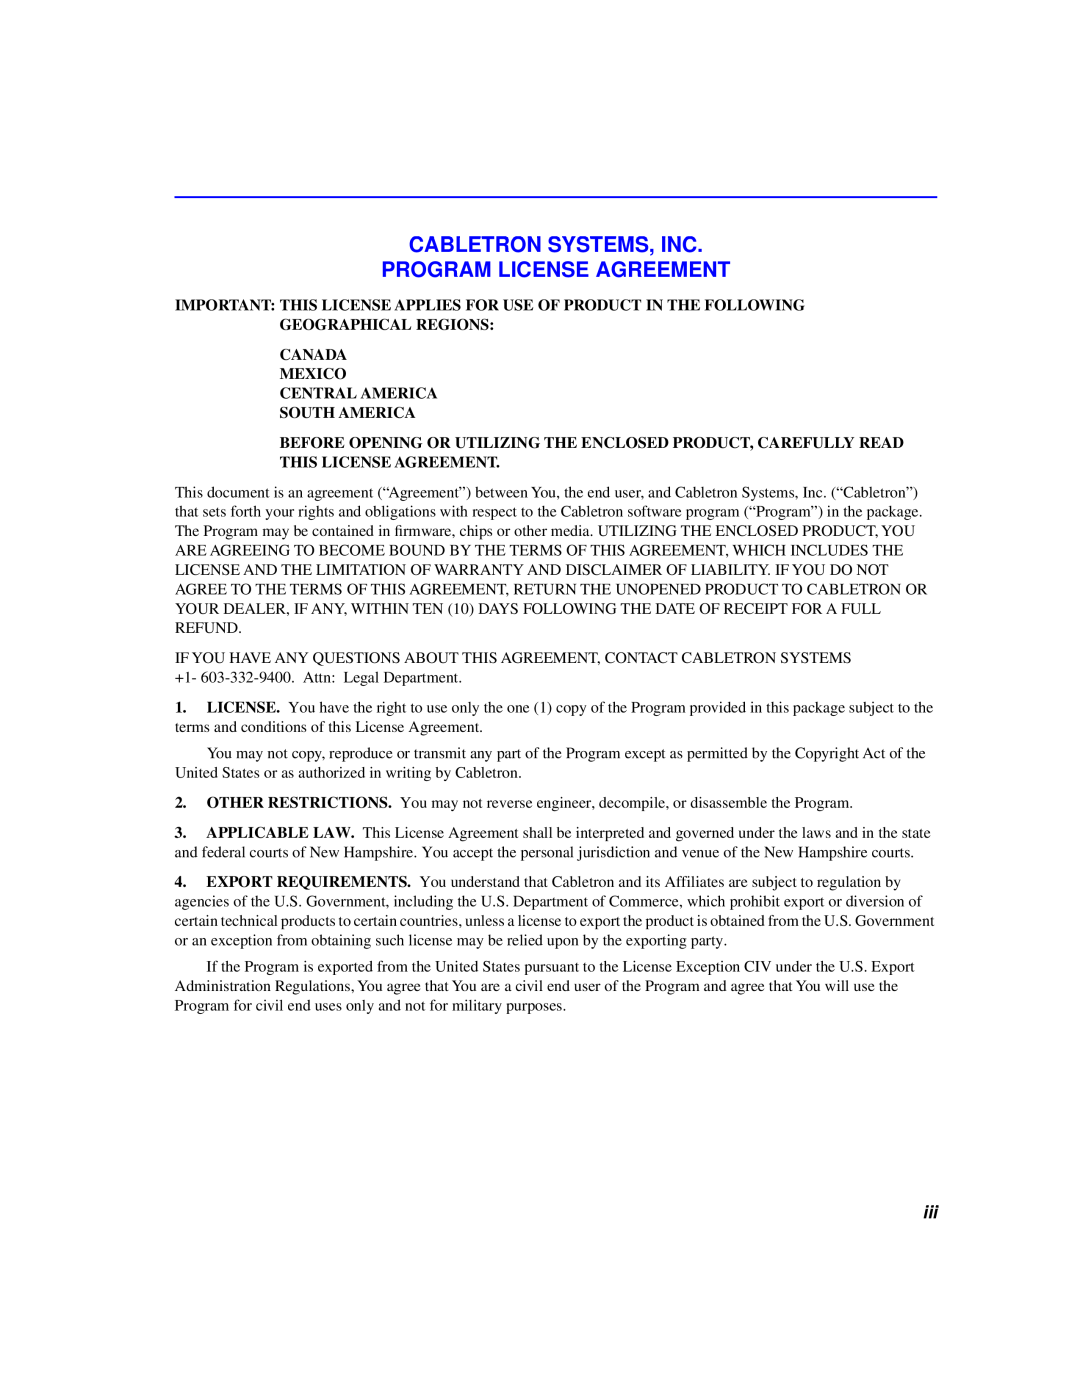 Cabletron Systems 2H253-25R manual Cabletron Systems, Inc Program License Agreement 